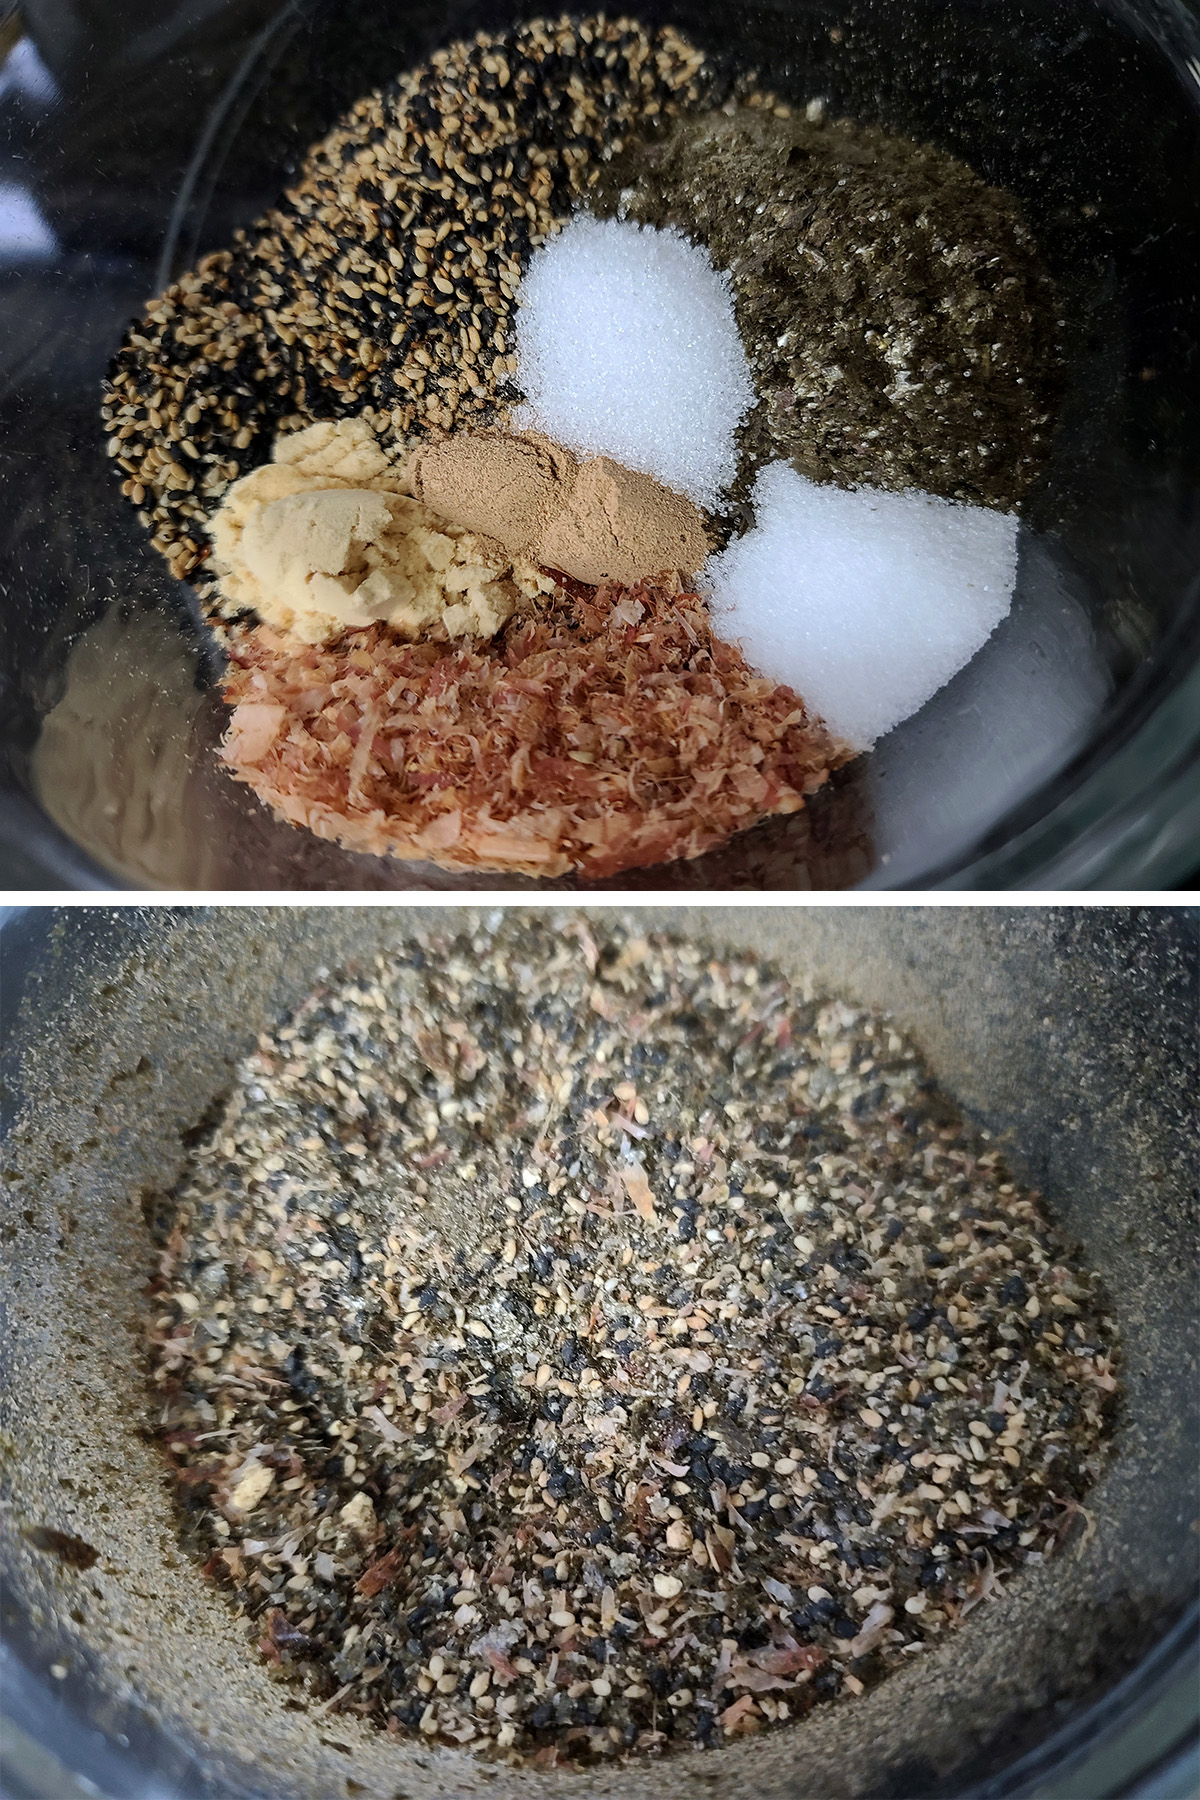 A 2 part image showing the ingredients in a bowl, before and after being mixed together.